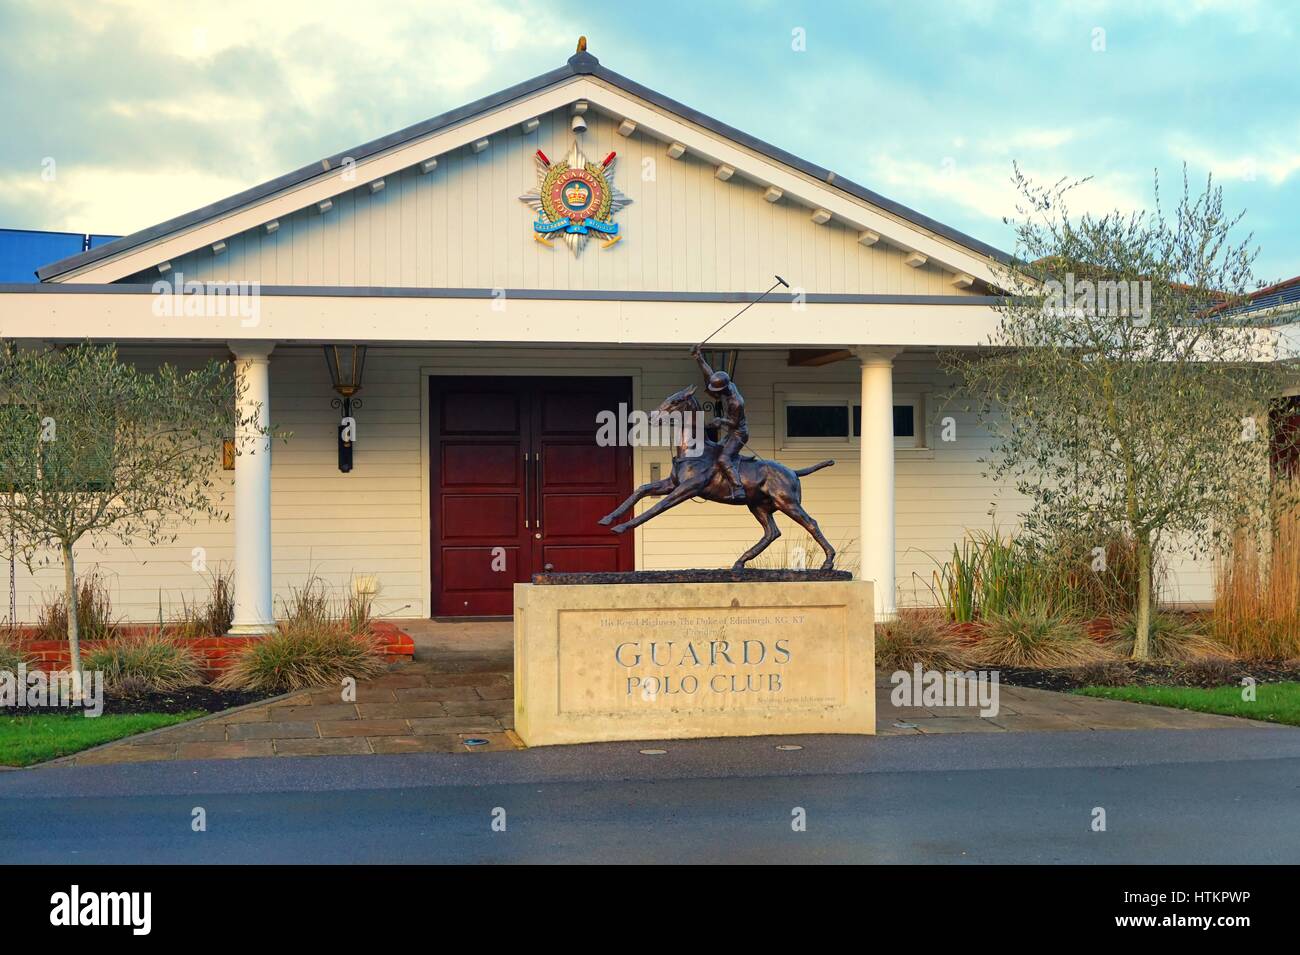 Ascot, UK - January 14th 2017: Statue of polo player outside the entrance to Guards Polo Club in Berkshire England Stock Photo